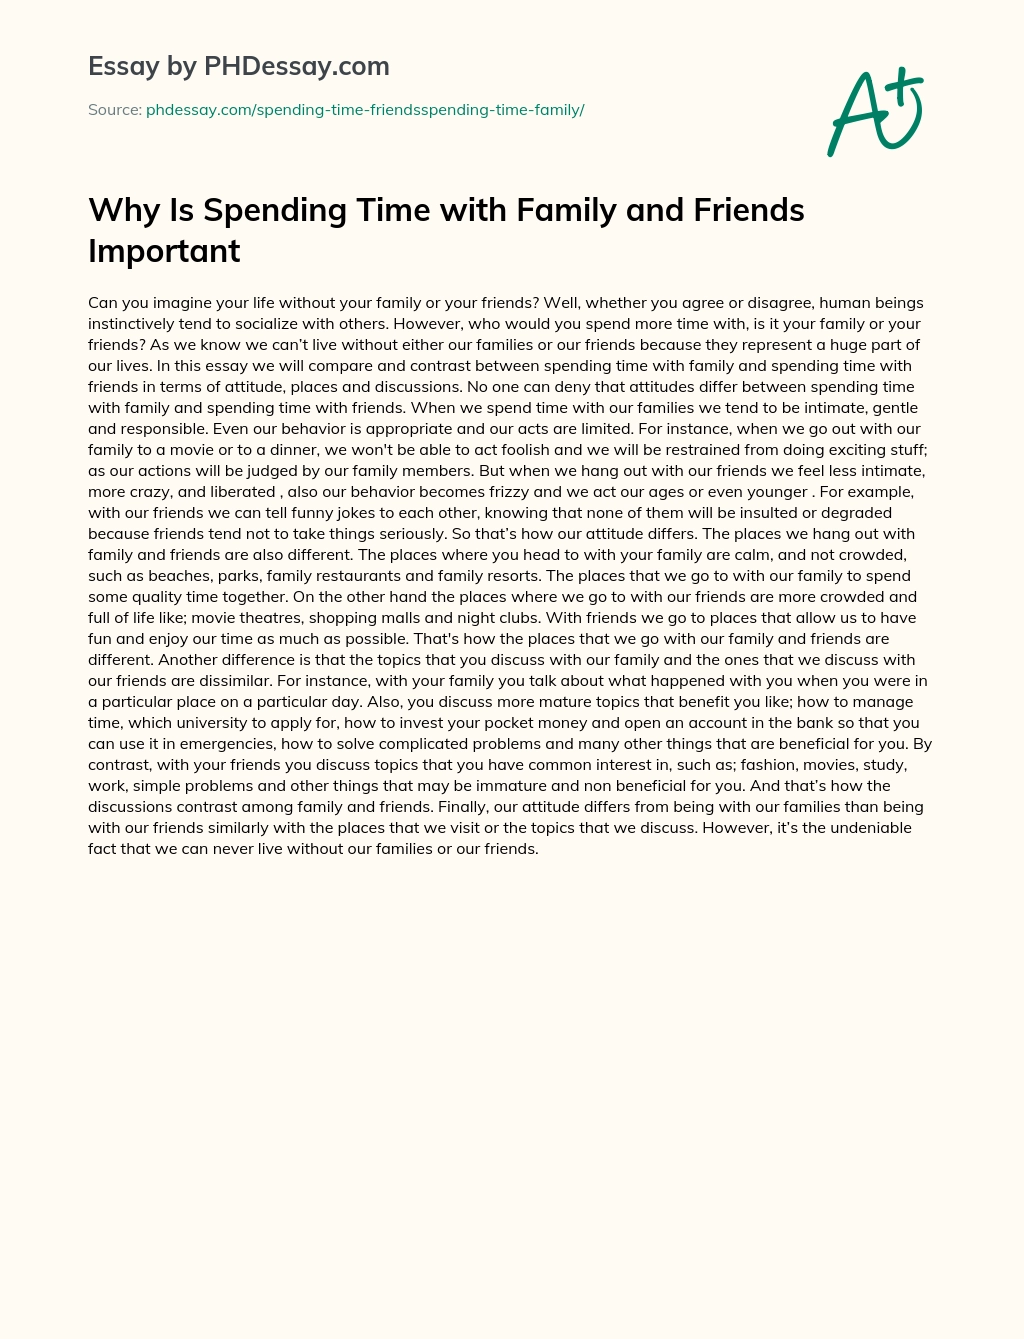 my family and friends essay